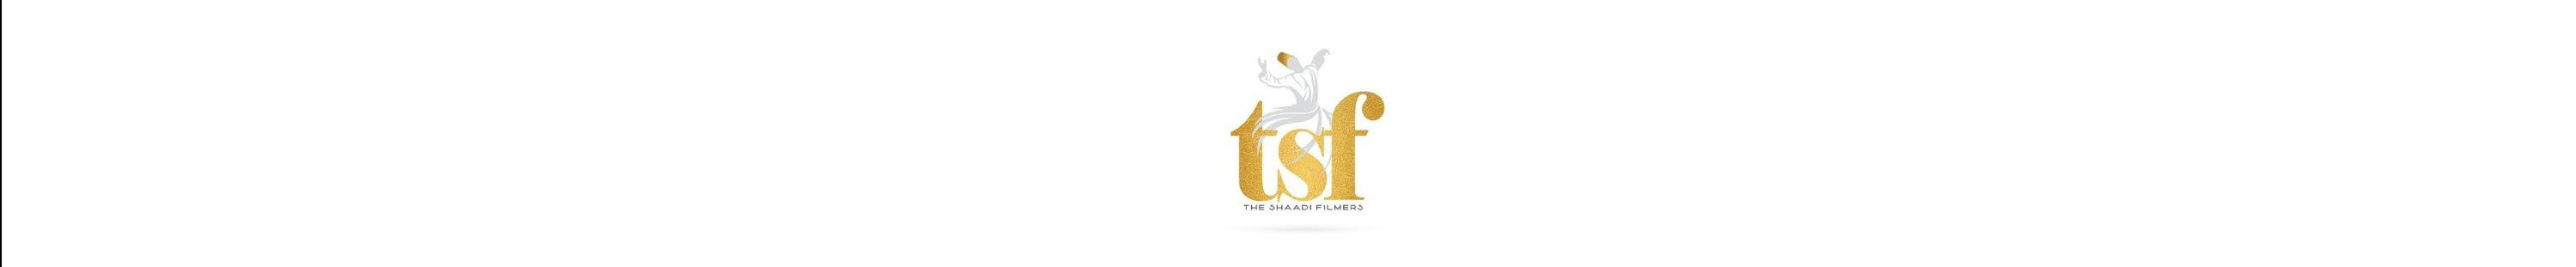 the shaadi filmers's profile banner